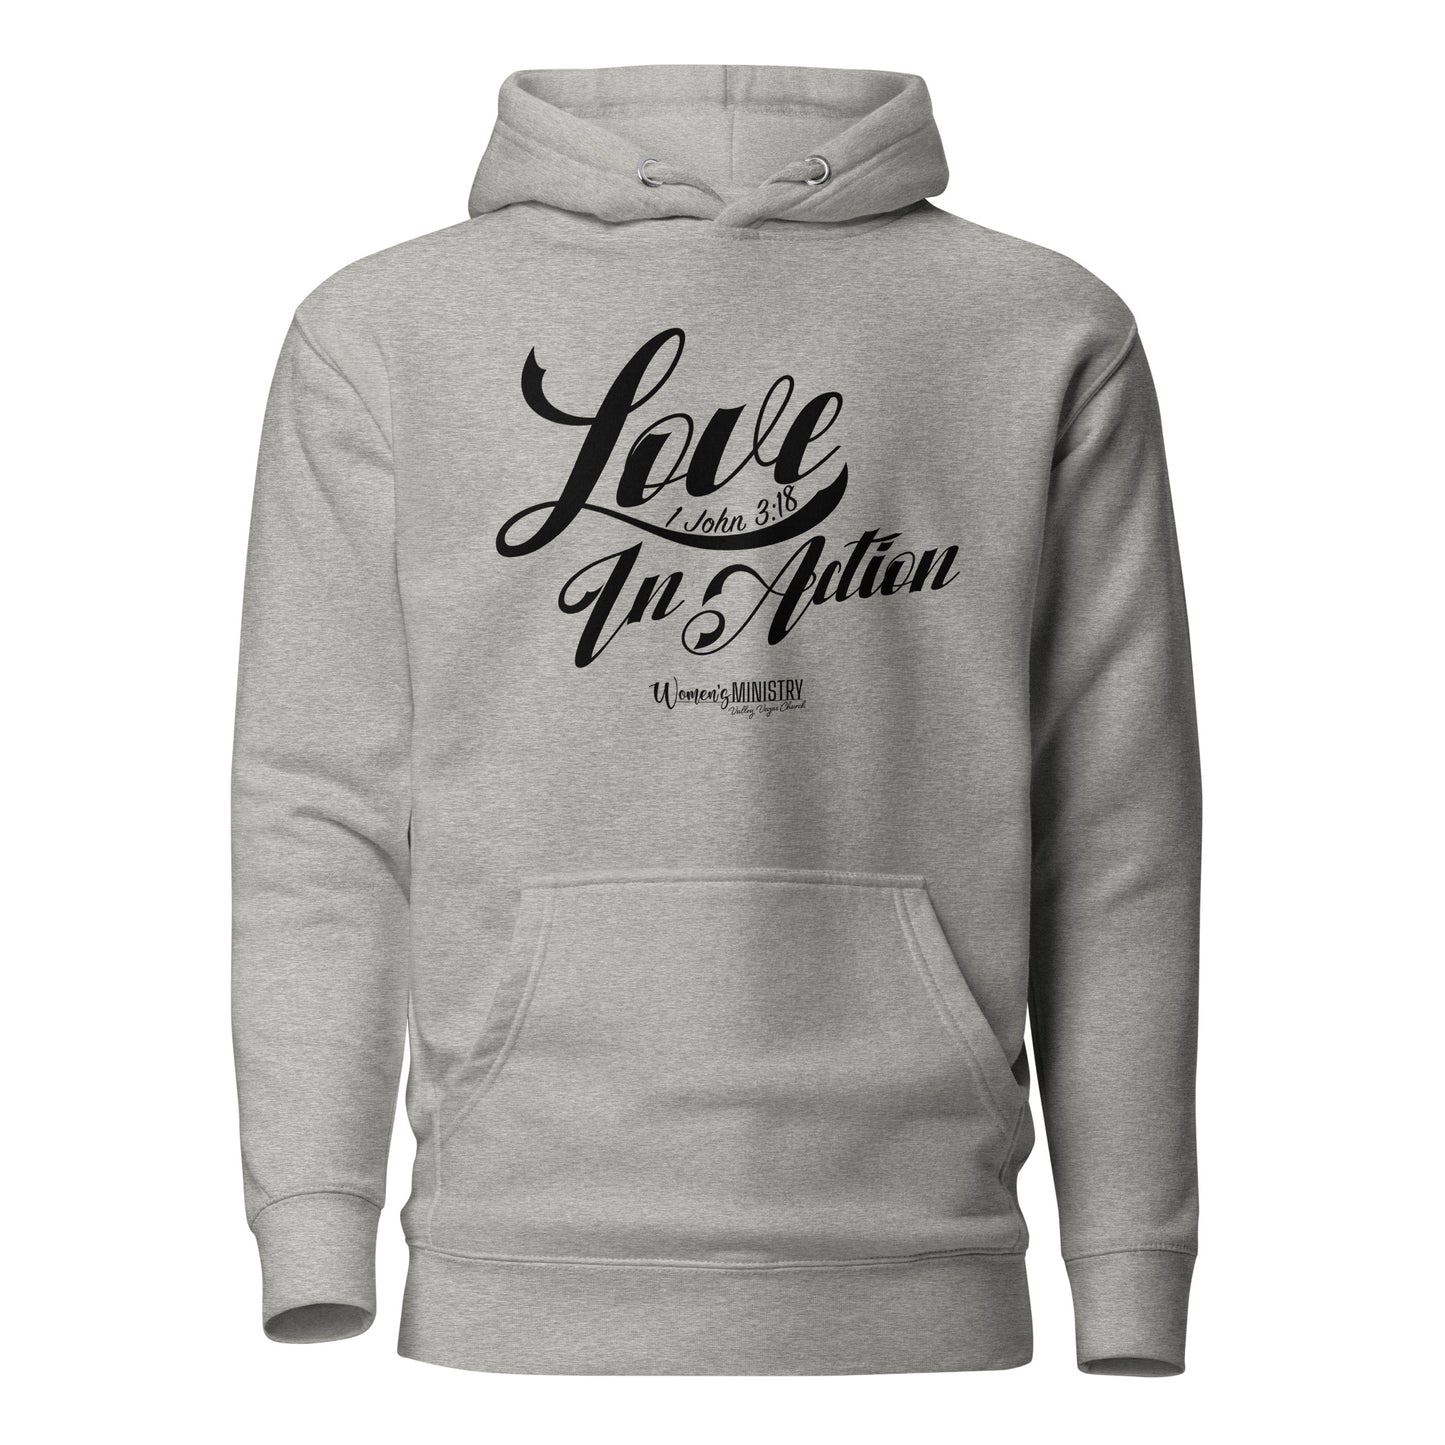 Love In Action - LIGHT | Women's Ministry | Hoodie